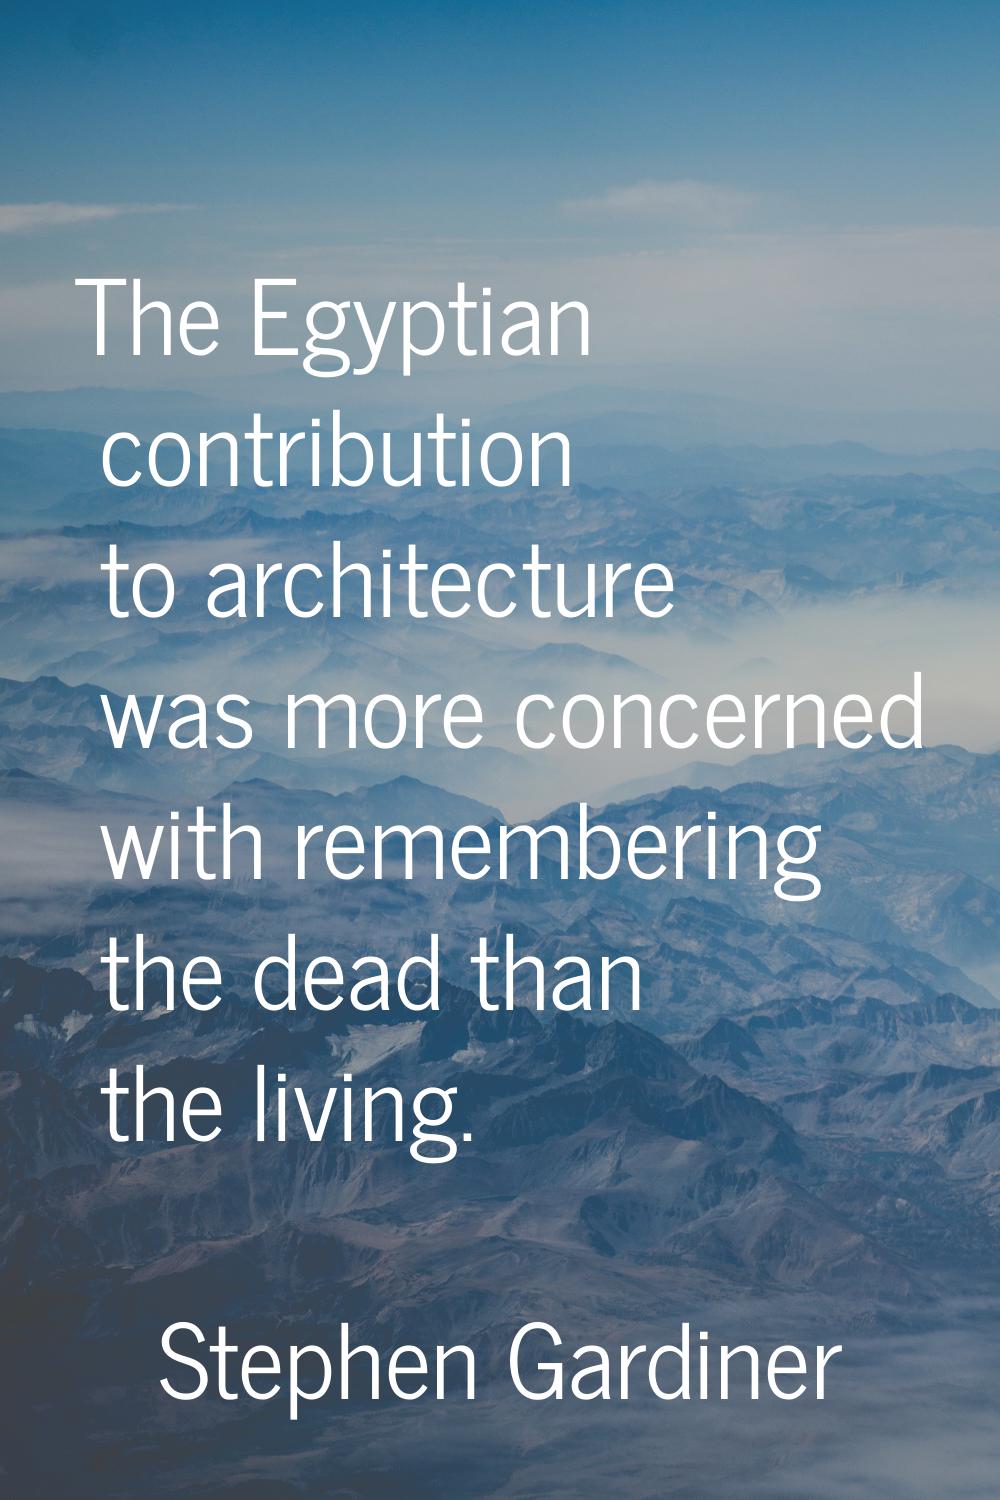 The Egyptian contribution to architecture was more concerned with remembering the dead than the liv